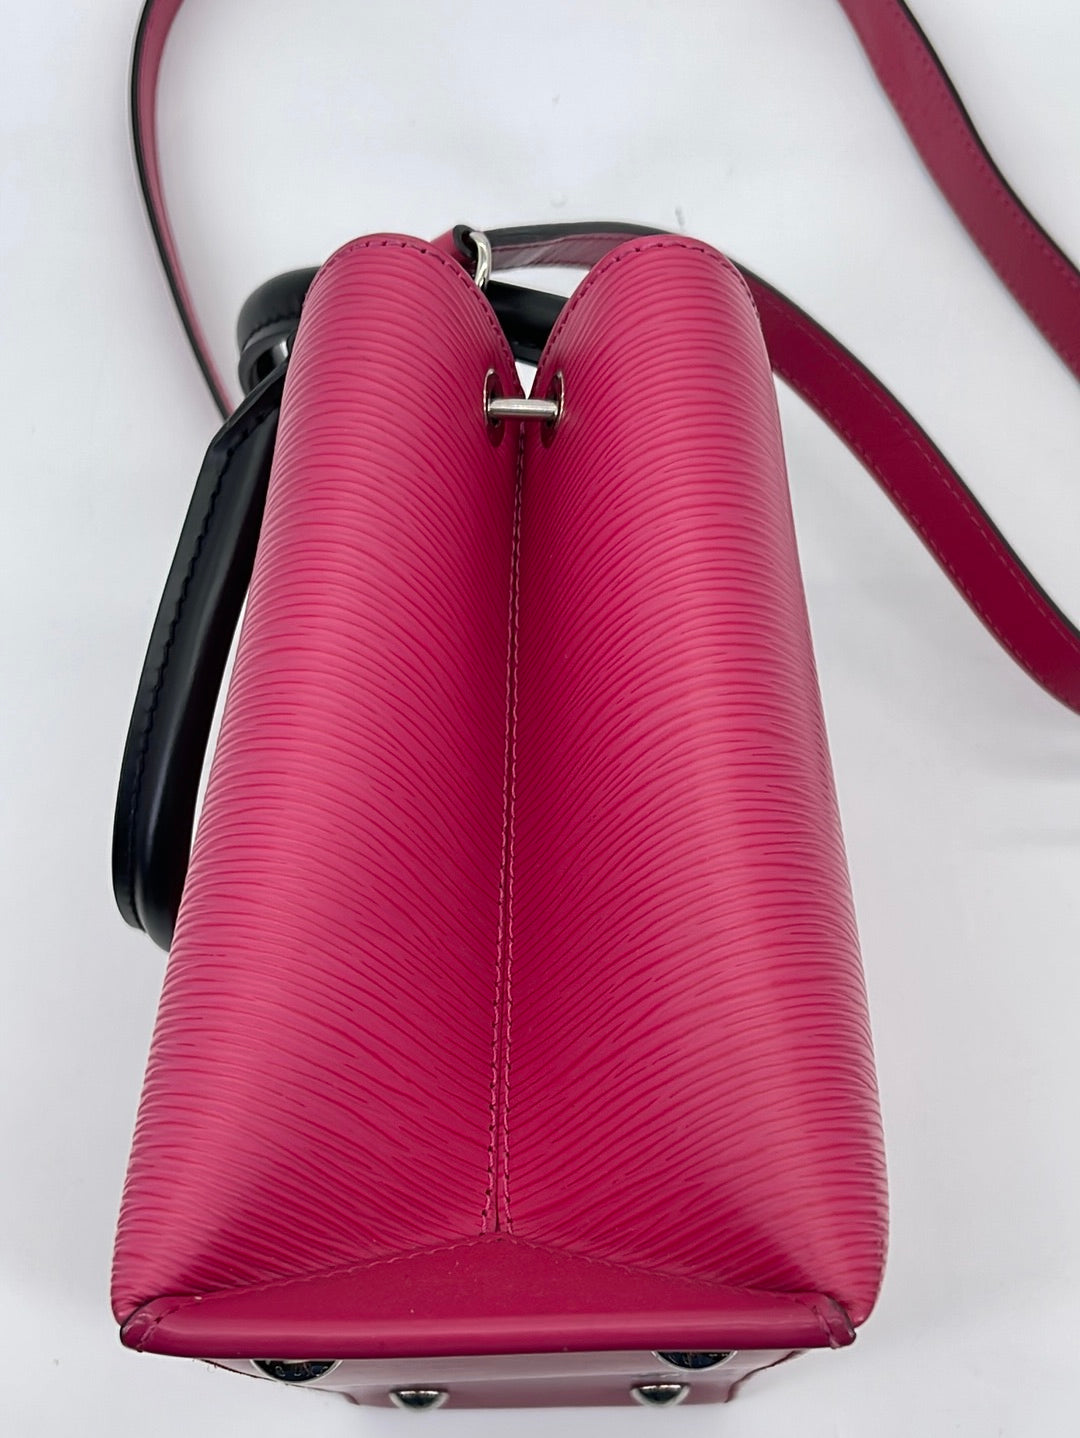 femme fatale on X: This pink Louis Vuitton bag is a dream https